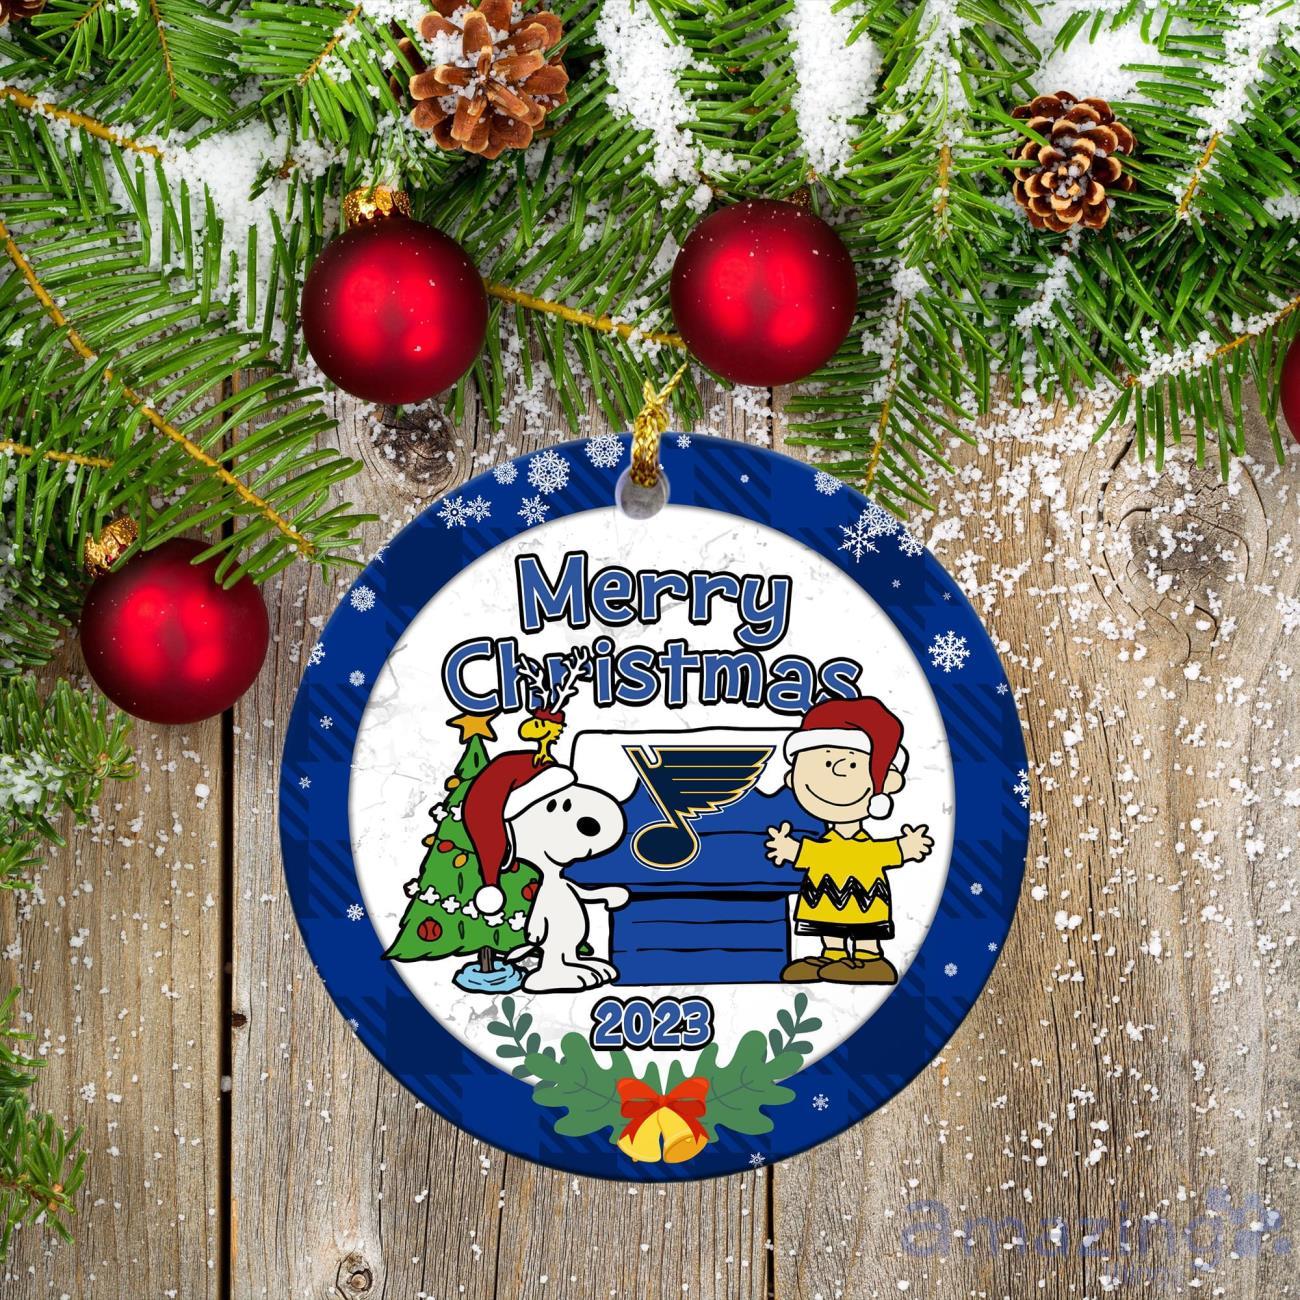 https://image.whatamazingthings.com/2023/10/st-louis-blues-ceramic-ornament-snoopy-christmas-special-gift.jpg